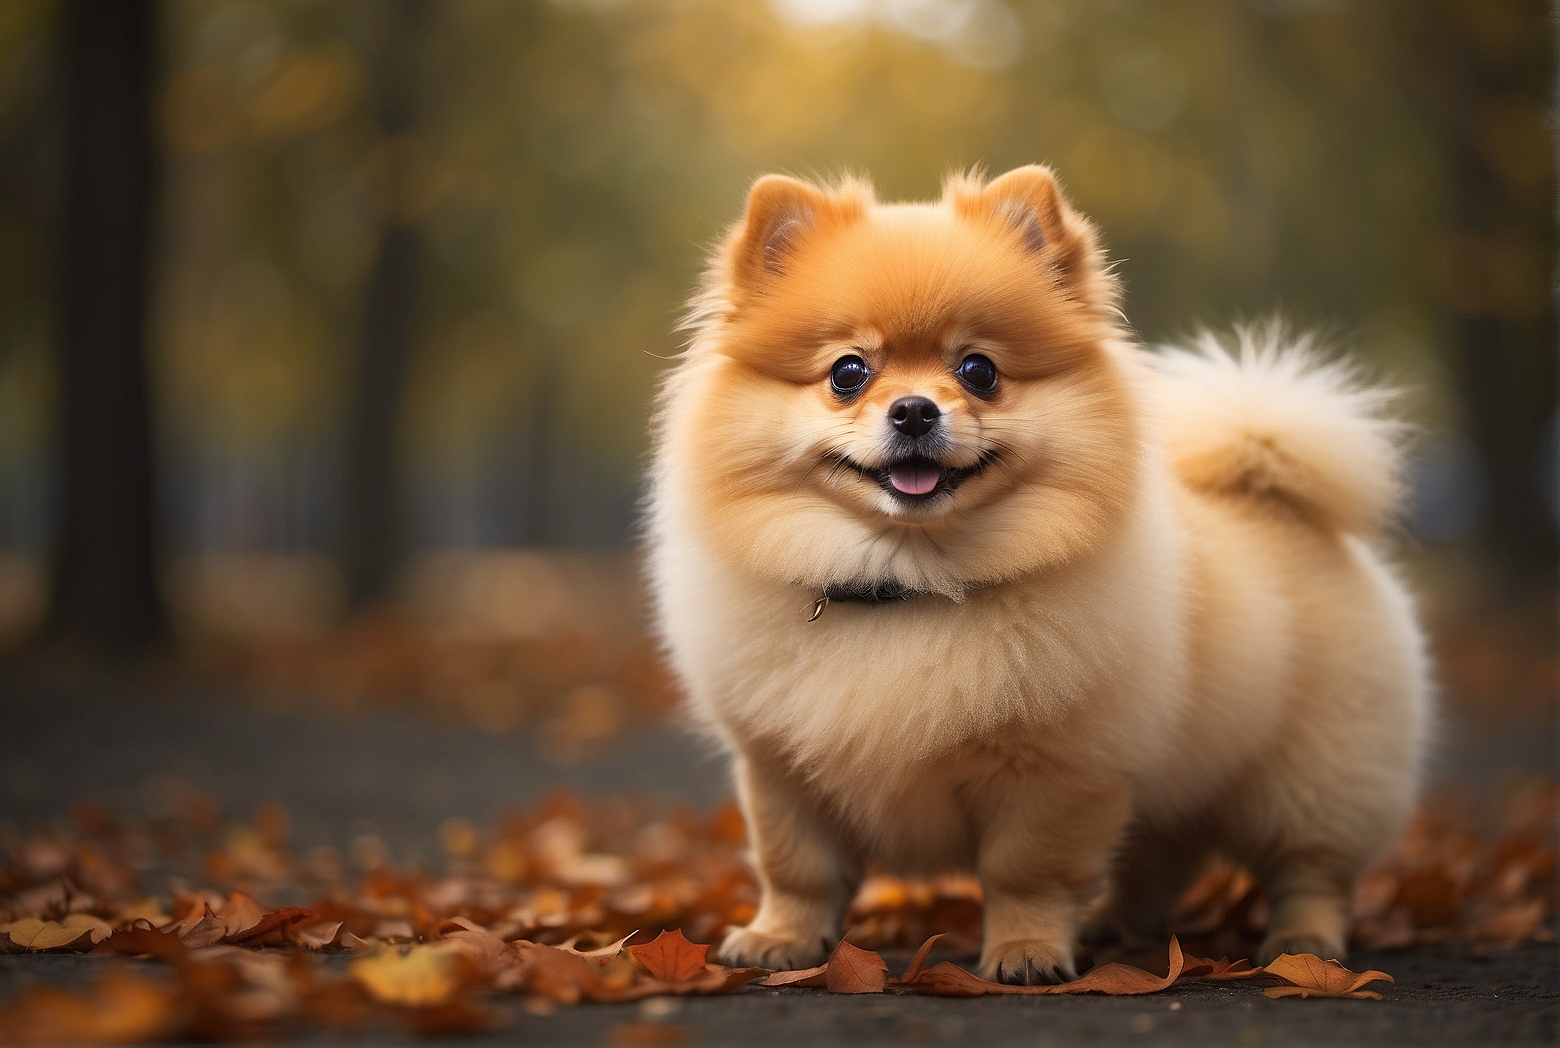 How Much Does a Trained Pomeranian Cost?